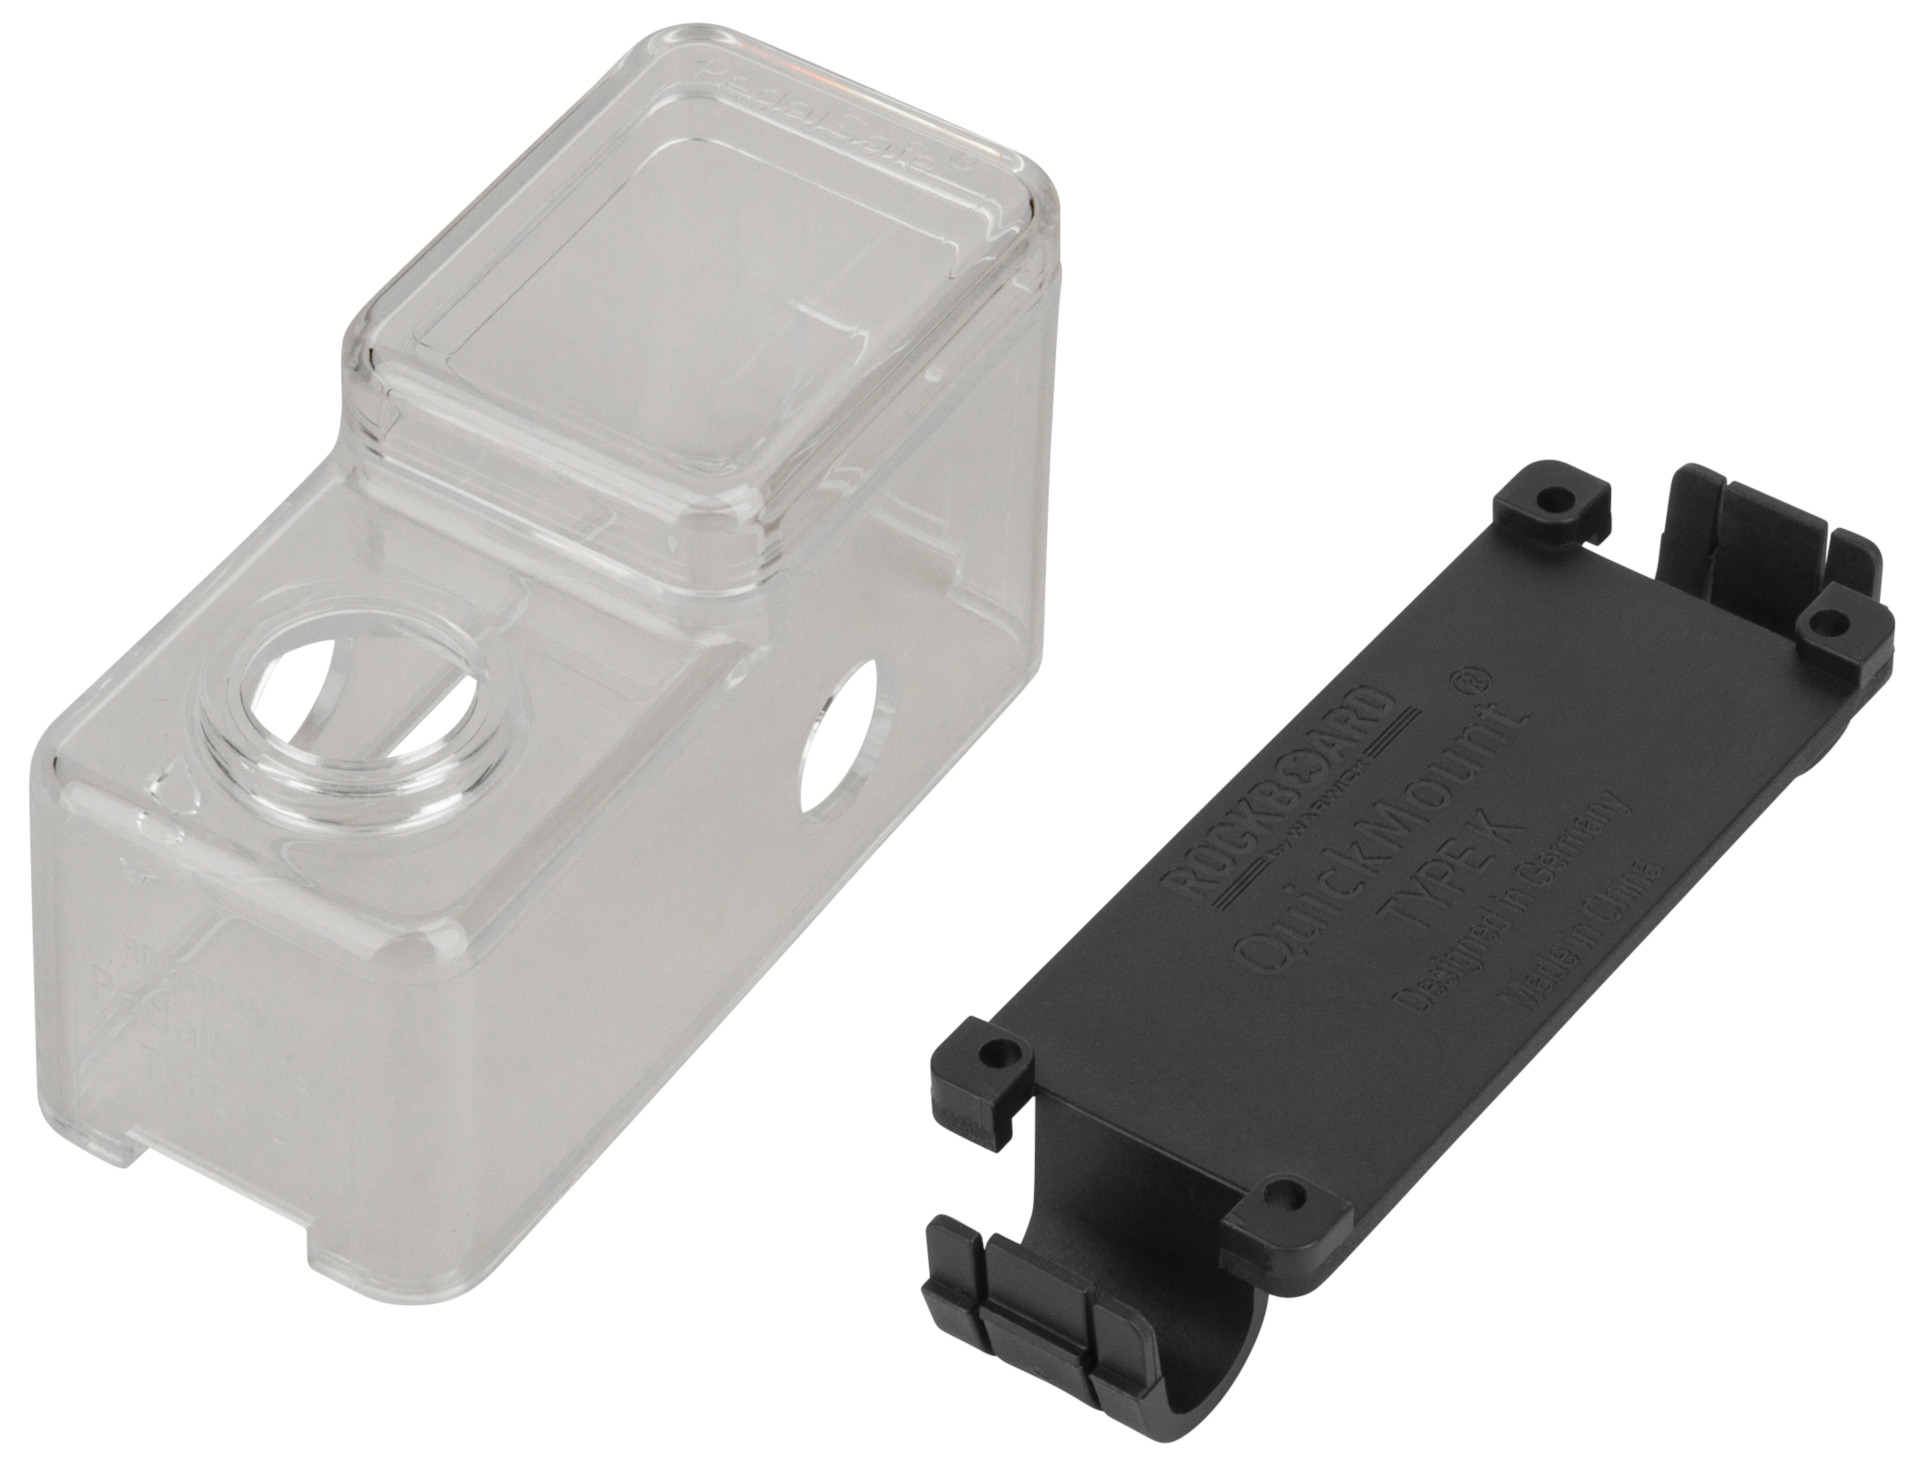 RockBoard PedalSafe Type K2 - Protective Cover And RockBoard Mounting Plate For Mooer Micro Series Pedals